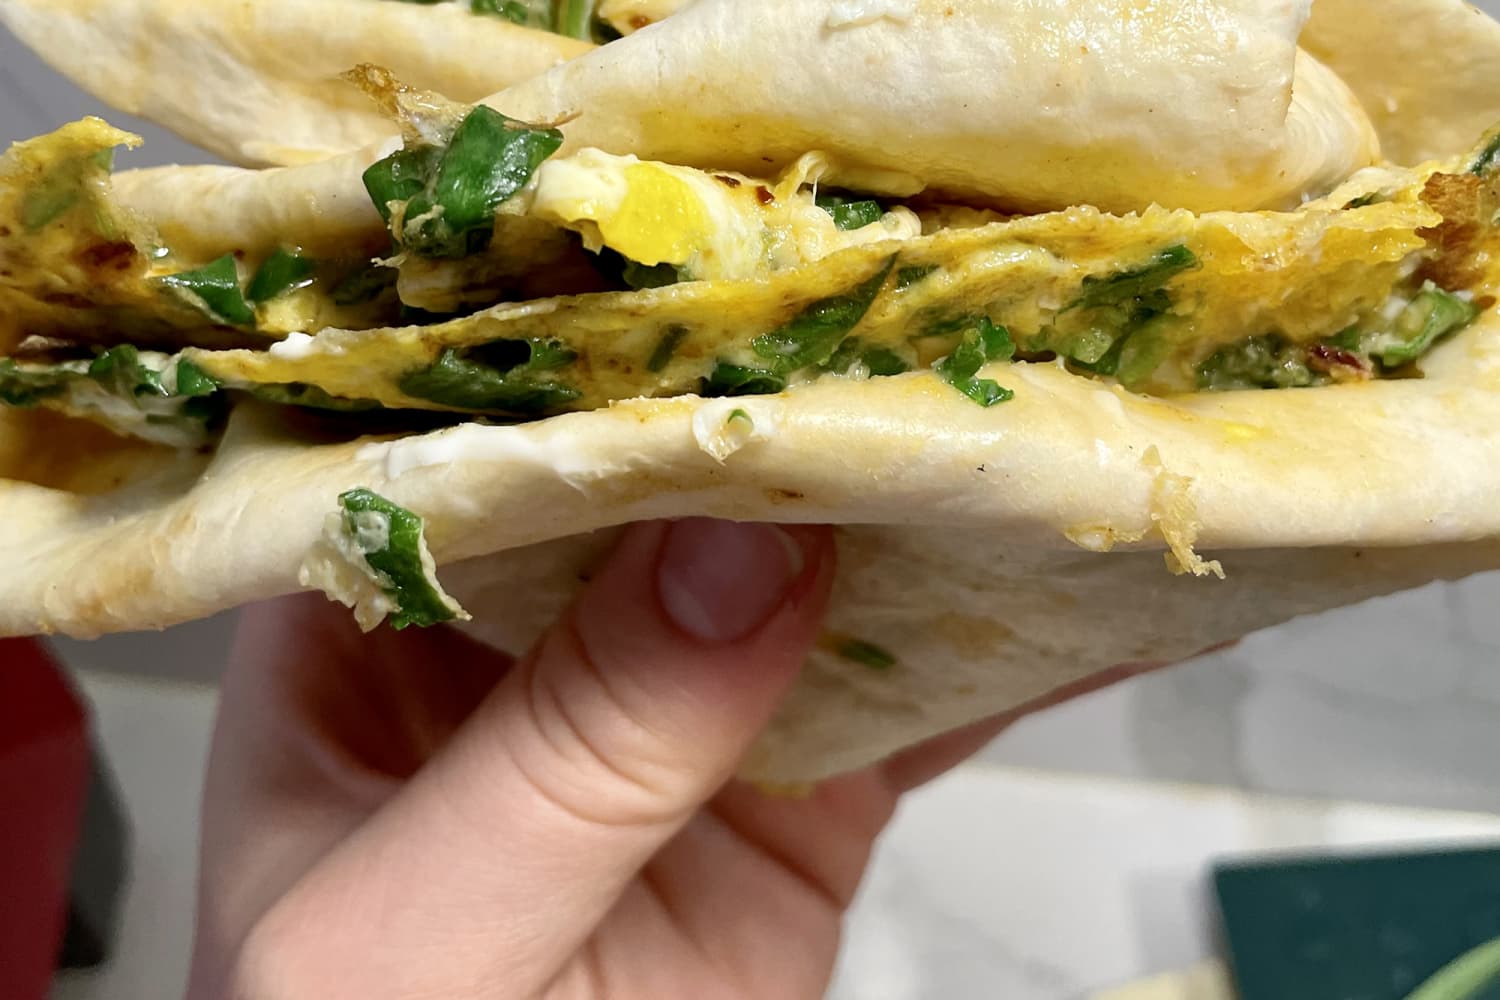 This 5-Minute Breakfast Egg Wrap Is So Good, I Memorized the Recipe